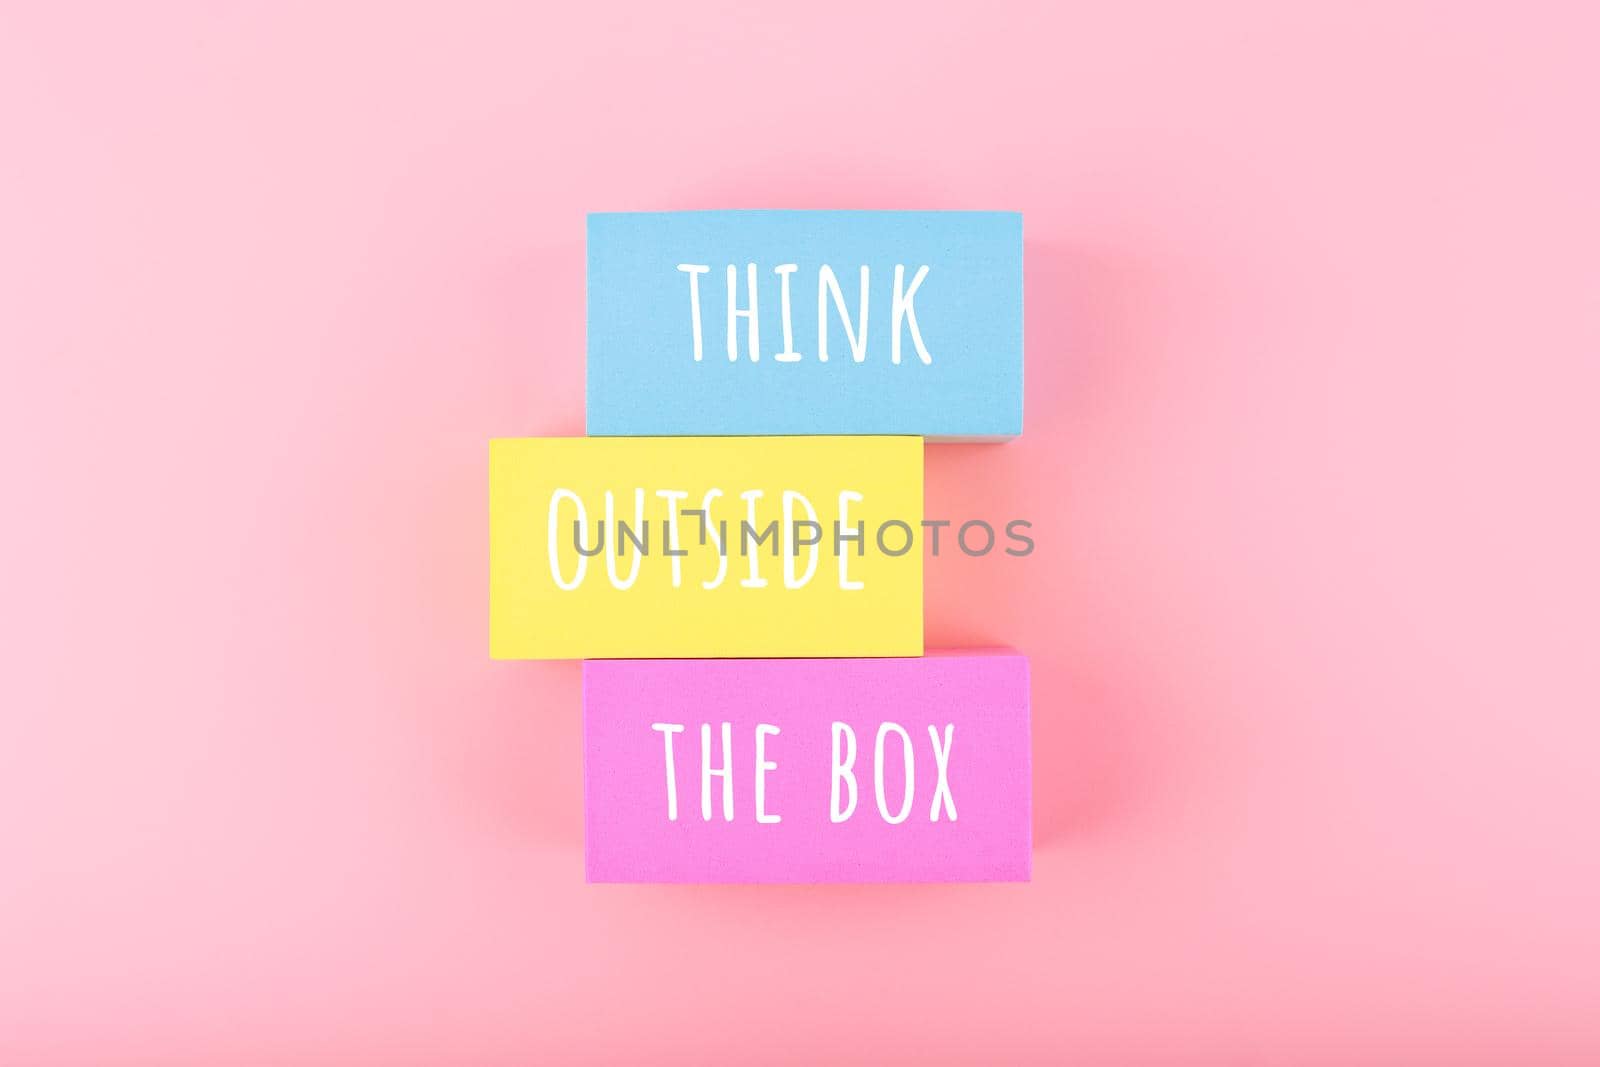 Concept of idea, creativity, start up or brainstorming. Creativity concept. Think outside the box written on colorful rectangles on bright pink background